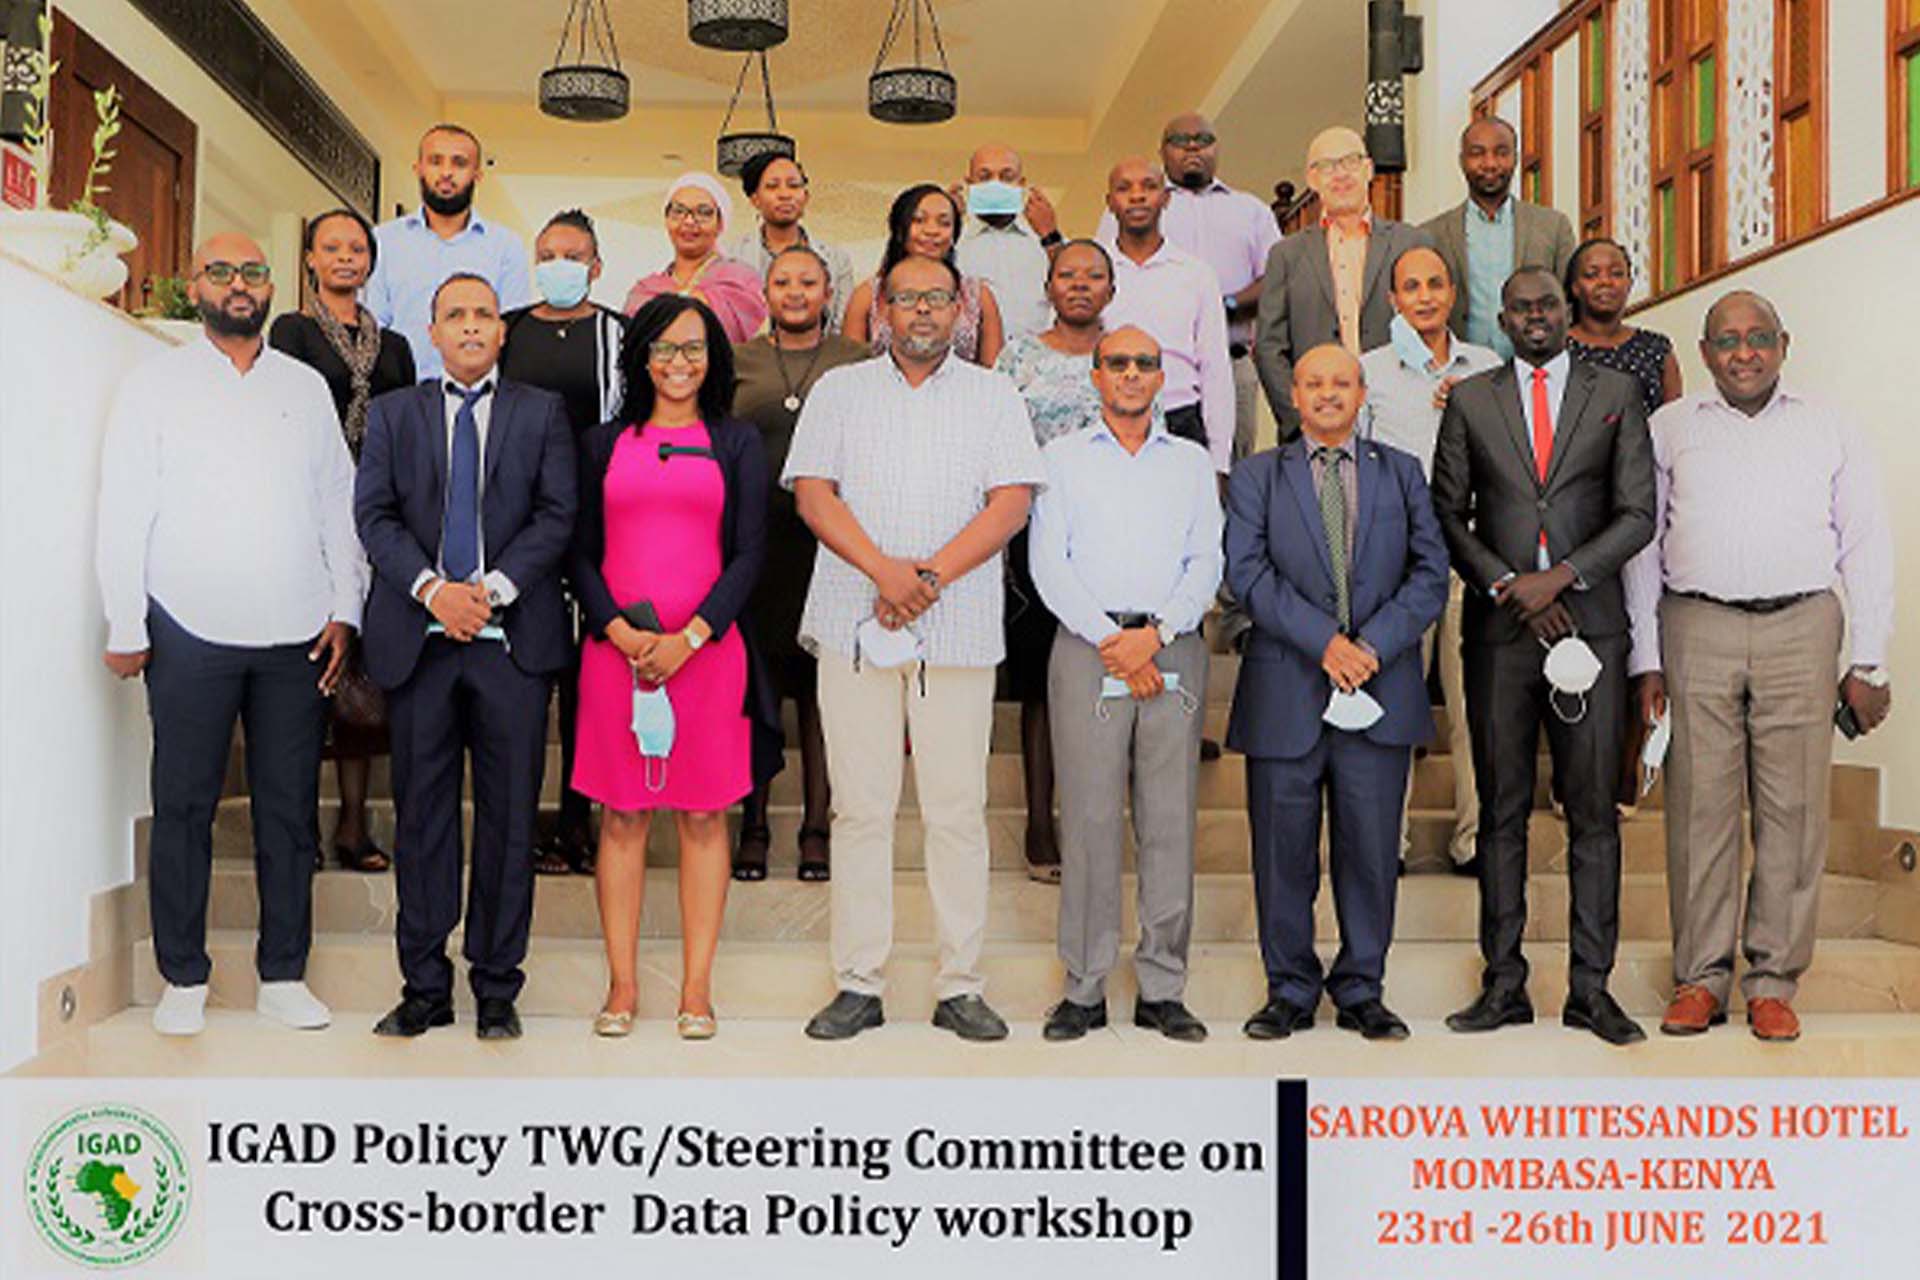 IGAD REGIONAL ACTION THROUGH DATA (RAD) 2nd Expert Technical Working Group and Steering Committee Meeting